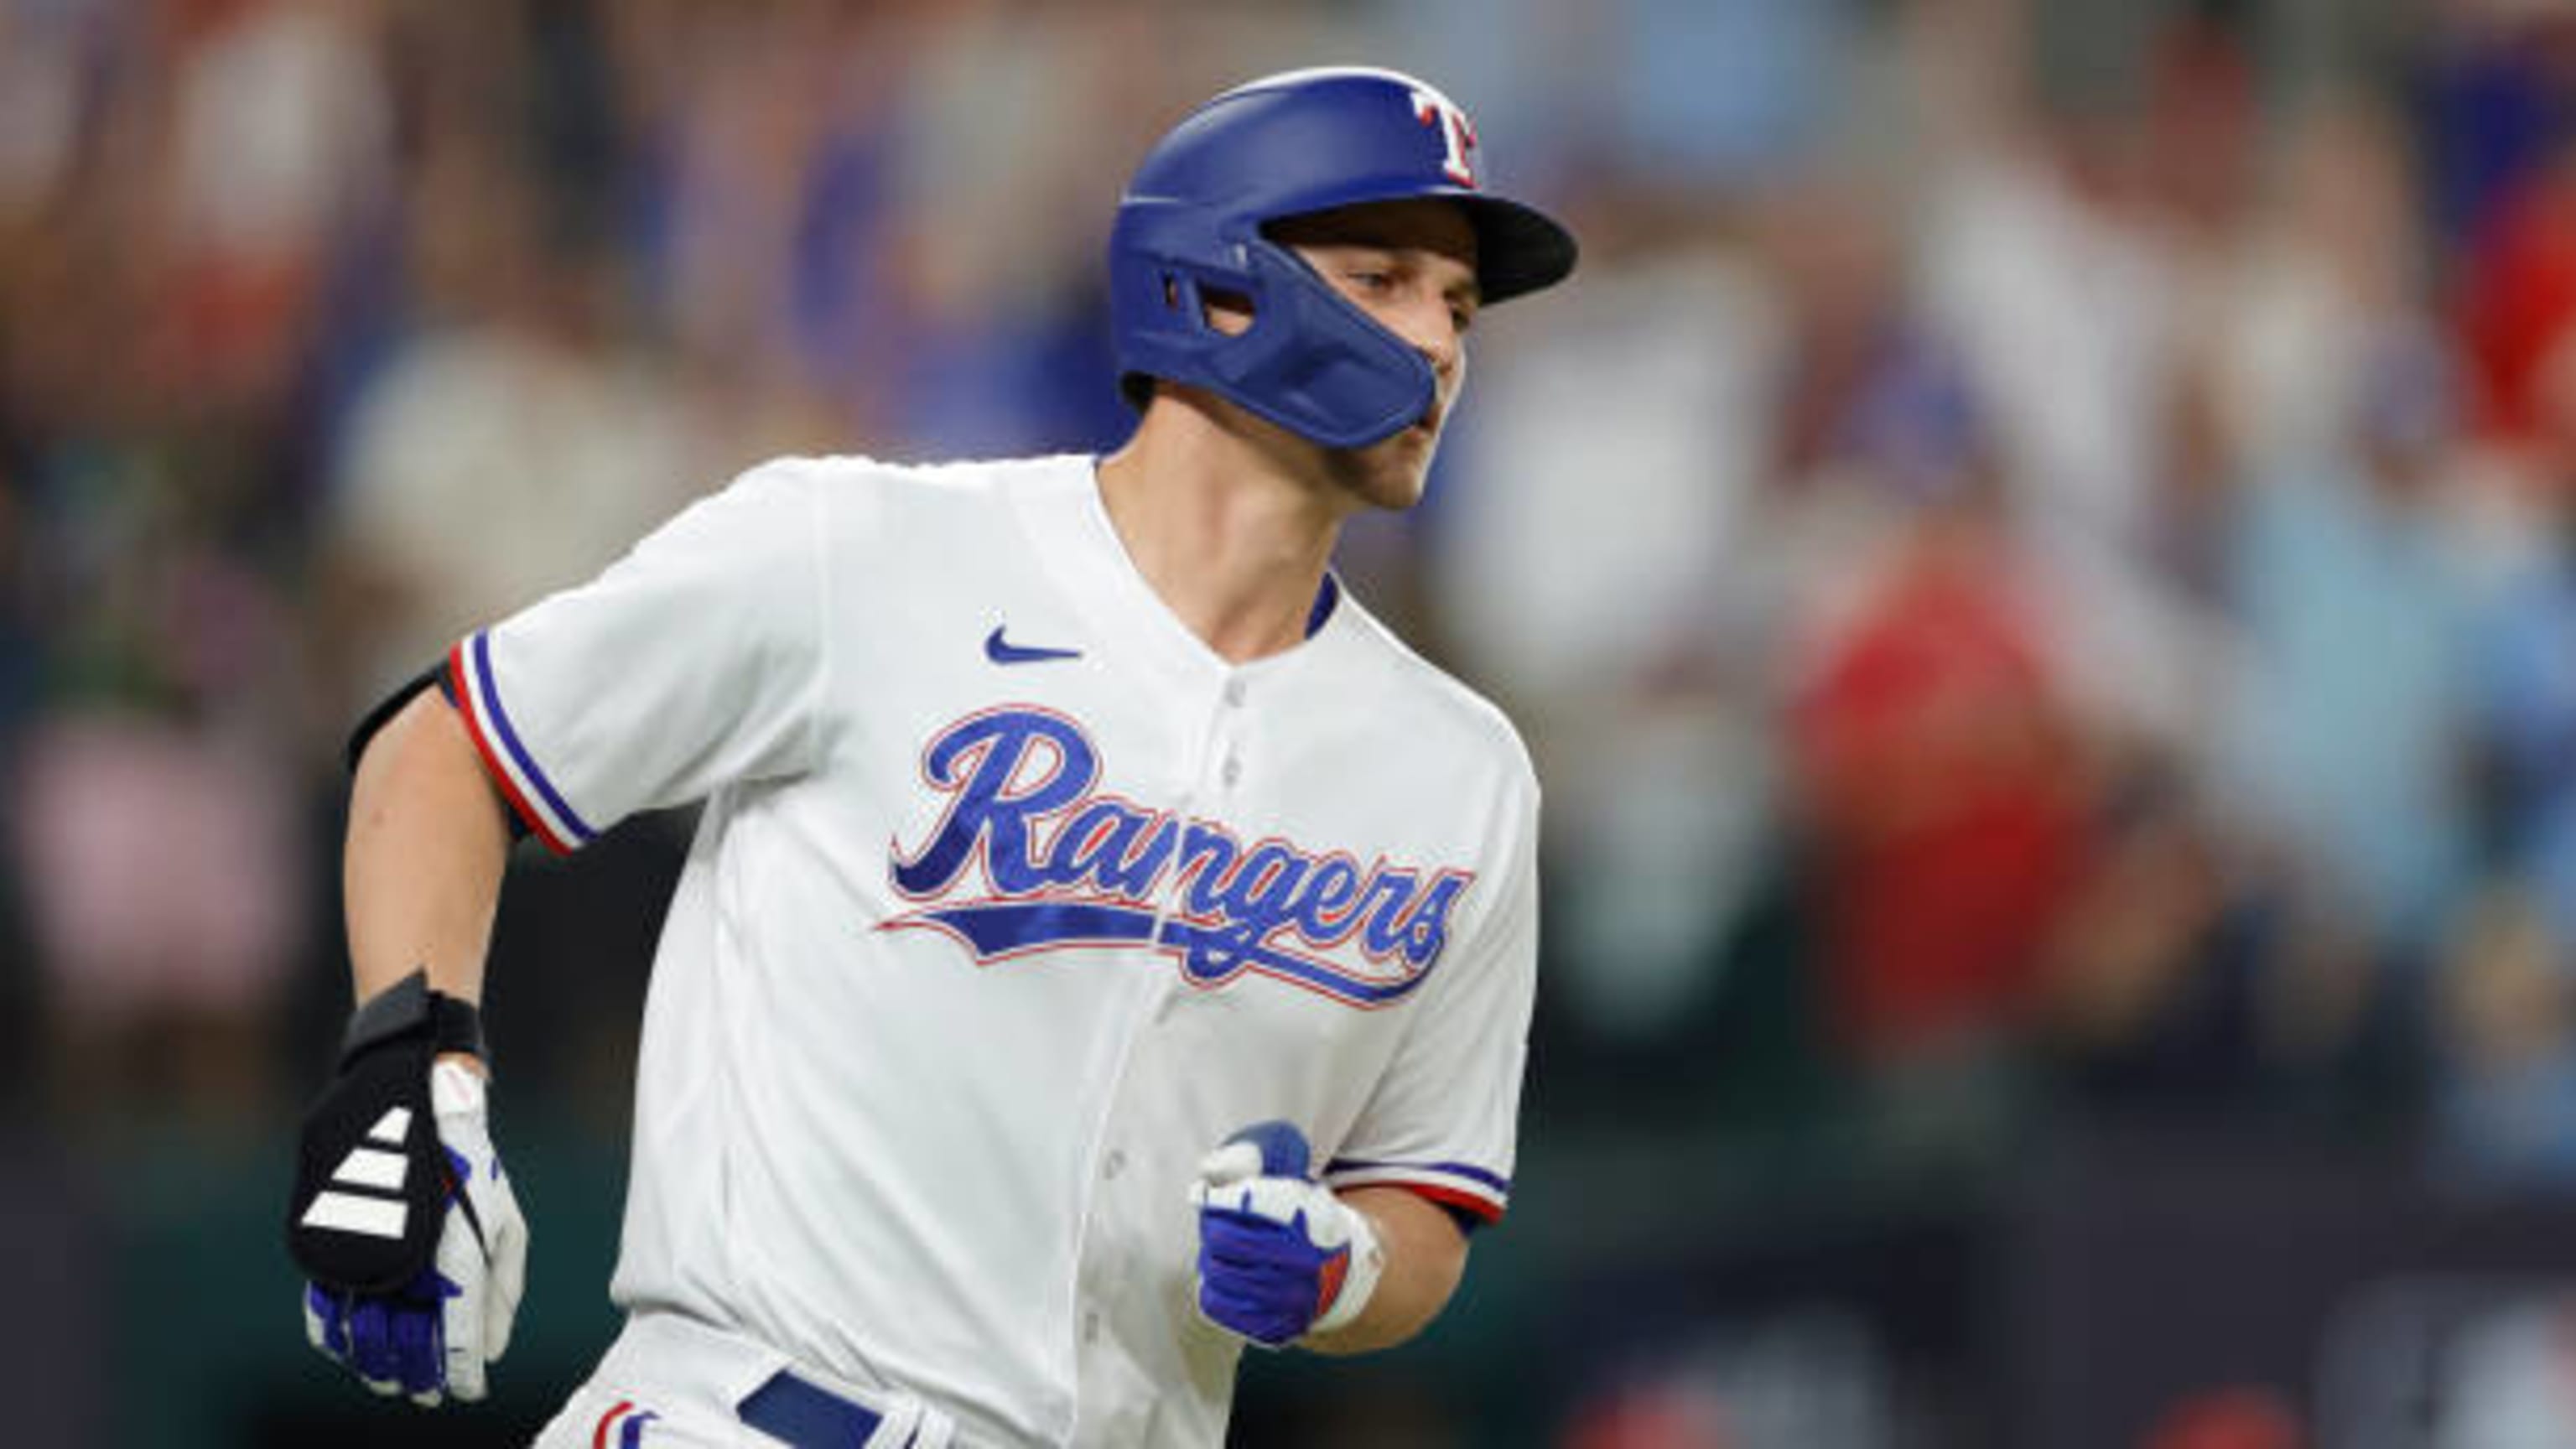 Rangers put up a five-run inning against the Orioles with base